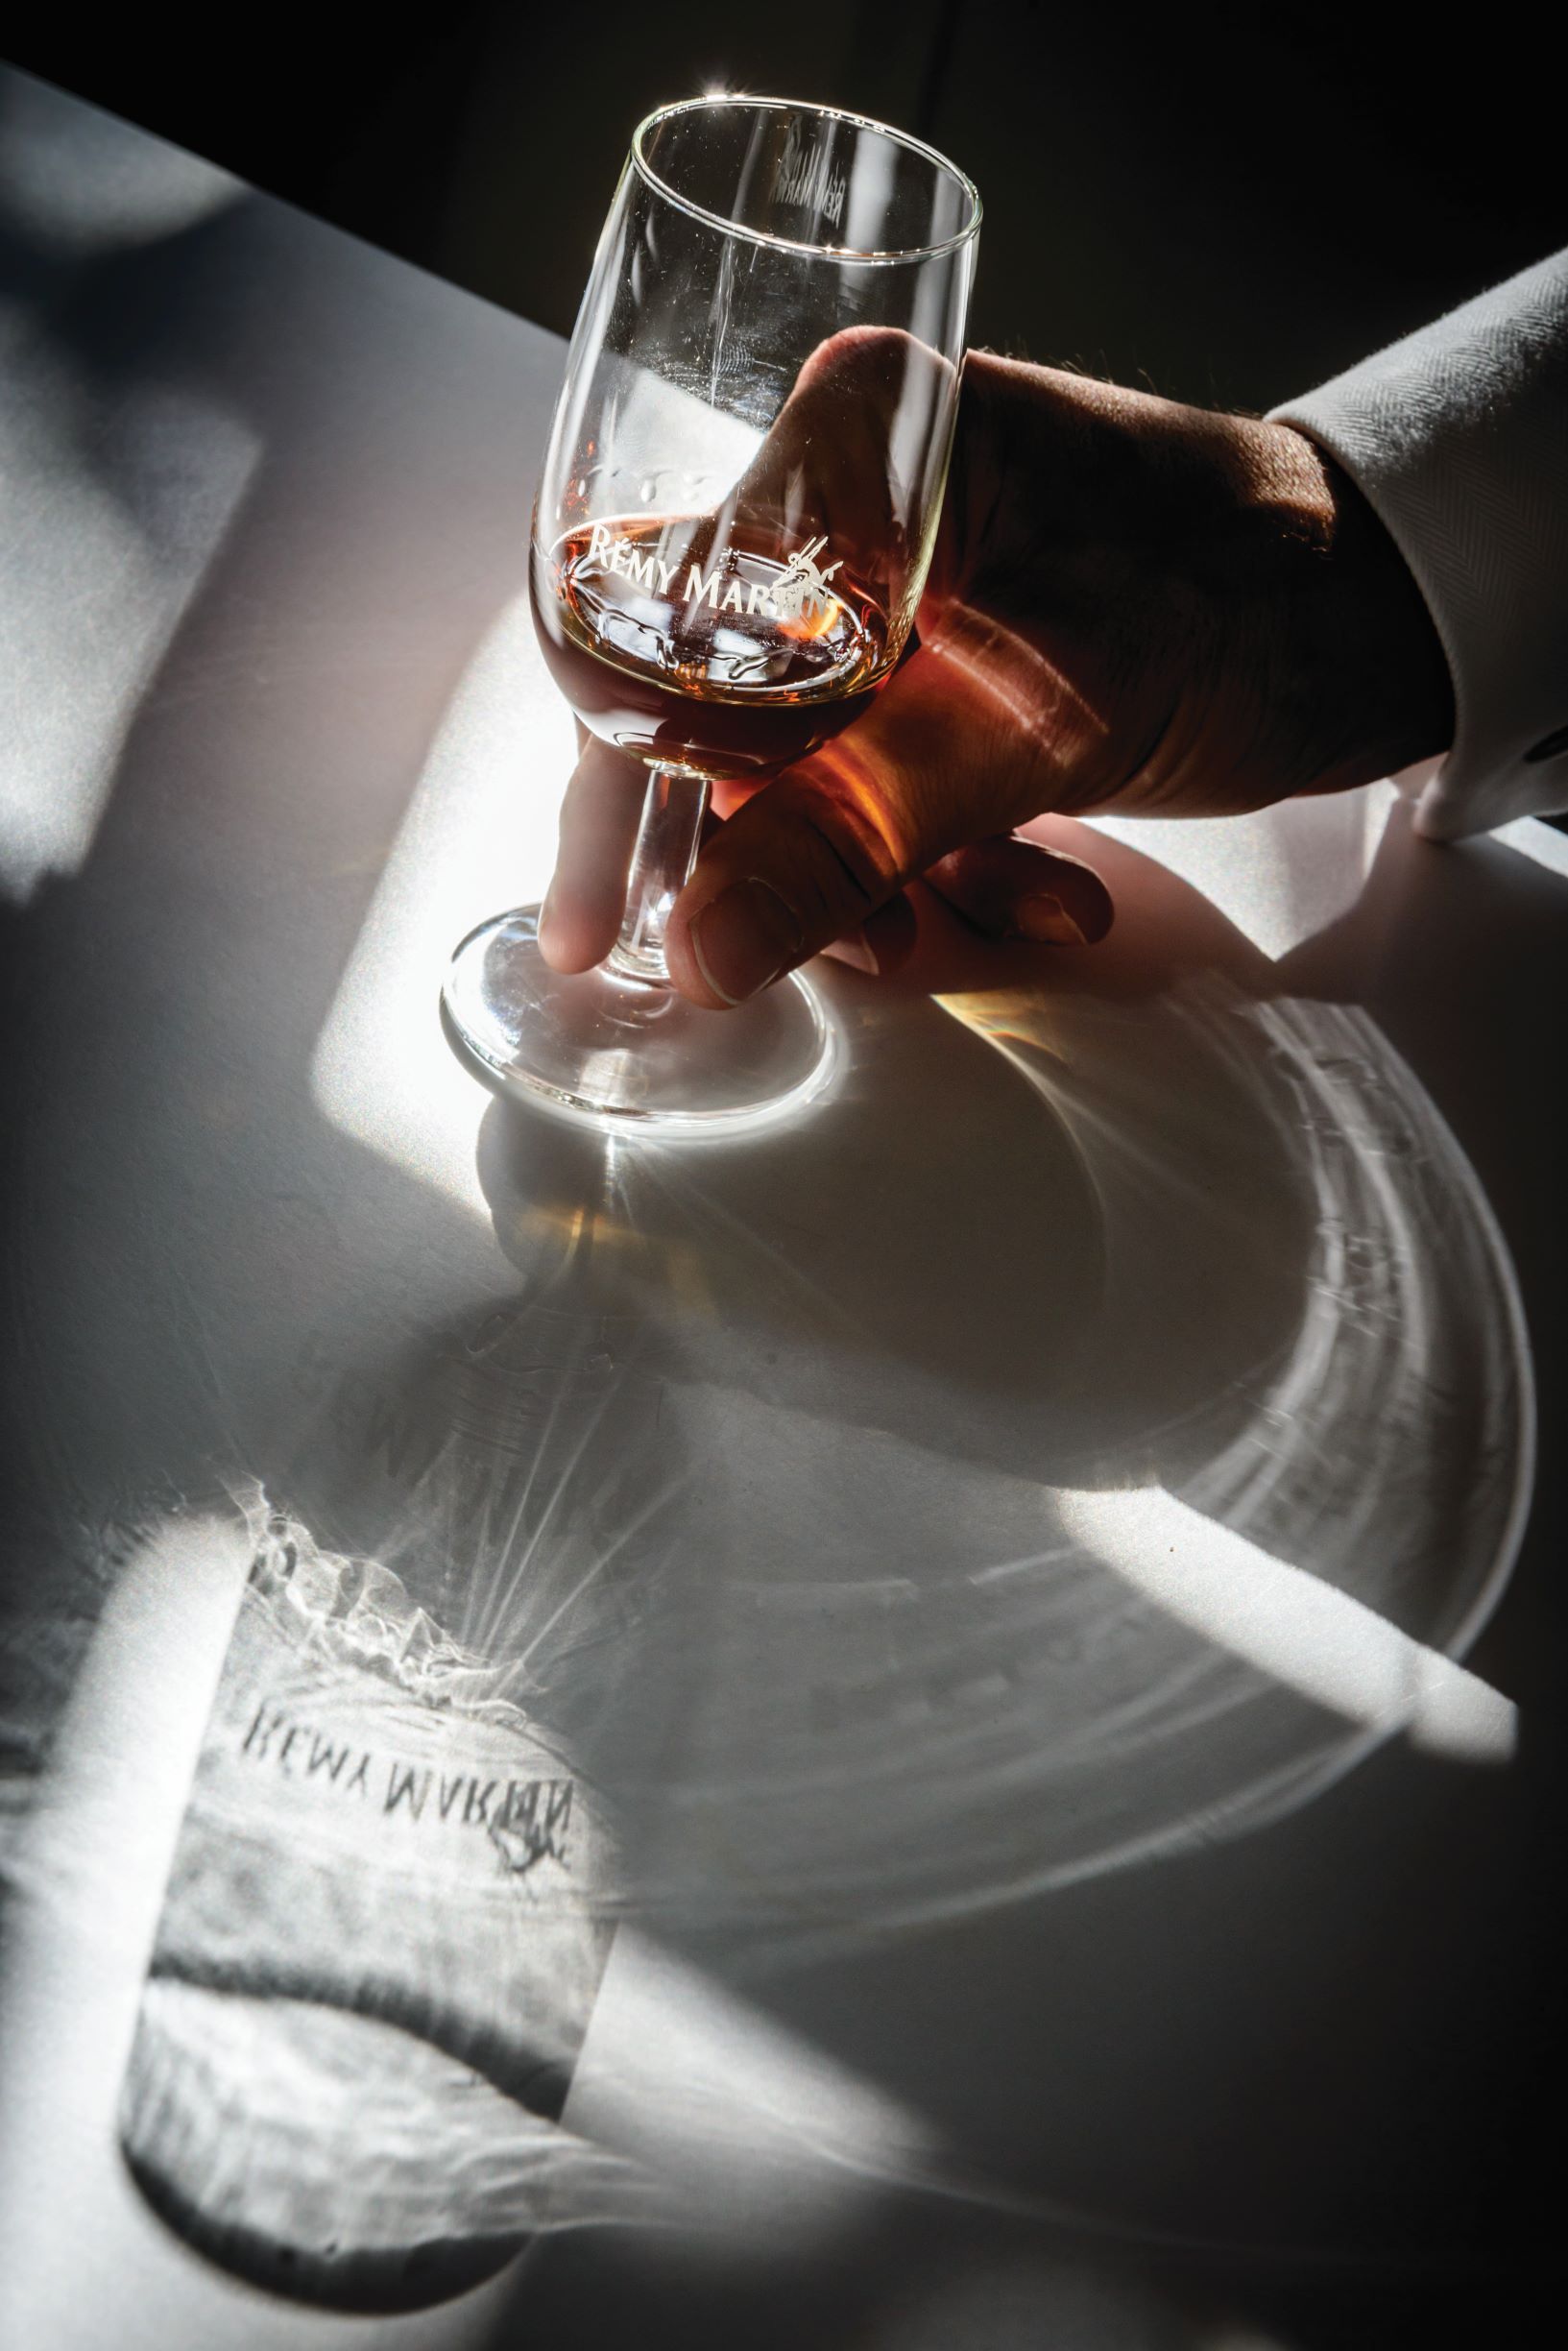 How to appreciate the RM27,000 Louis XIII cognac according to a Cellar  Master